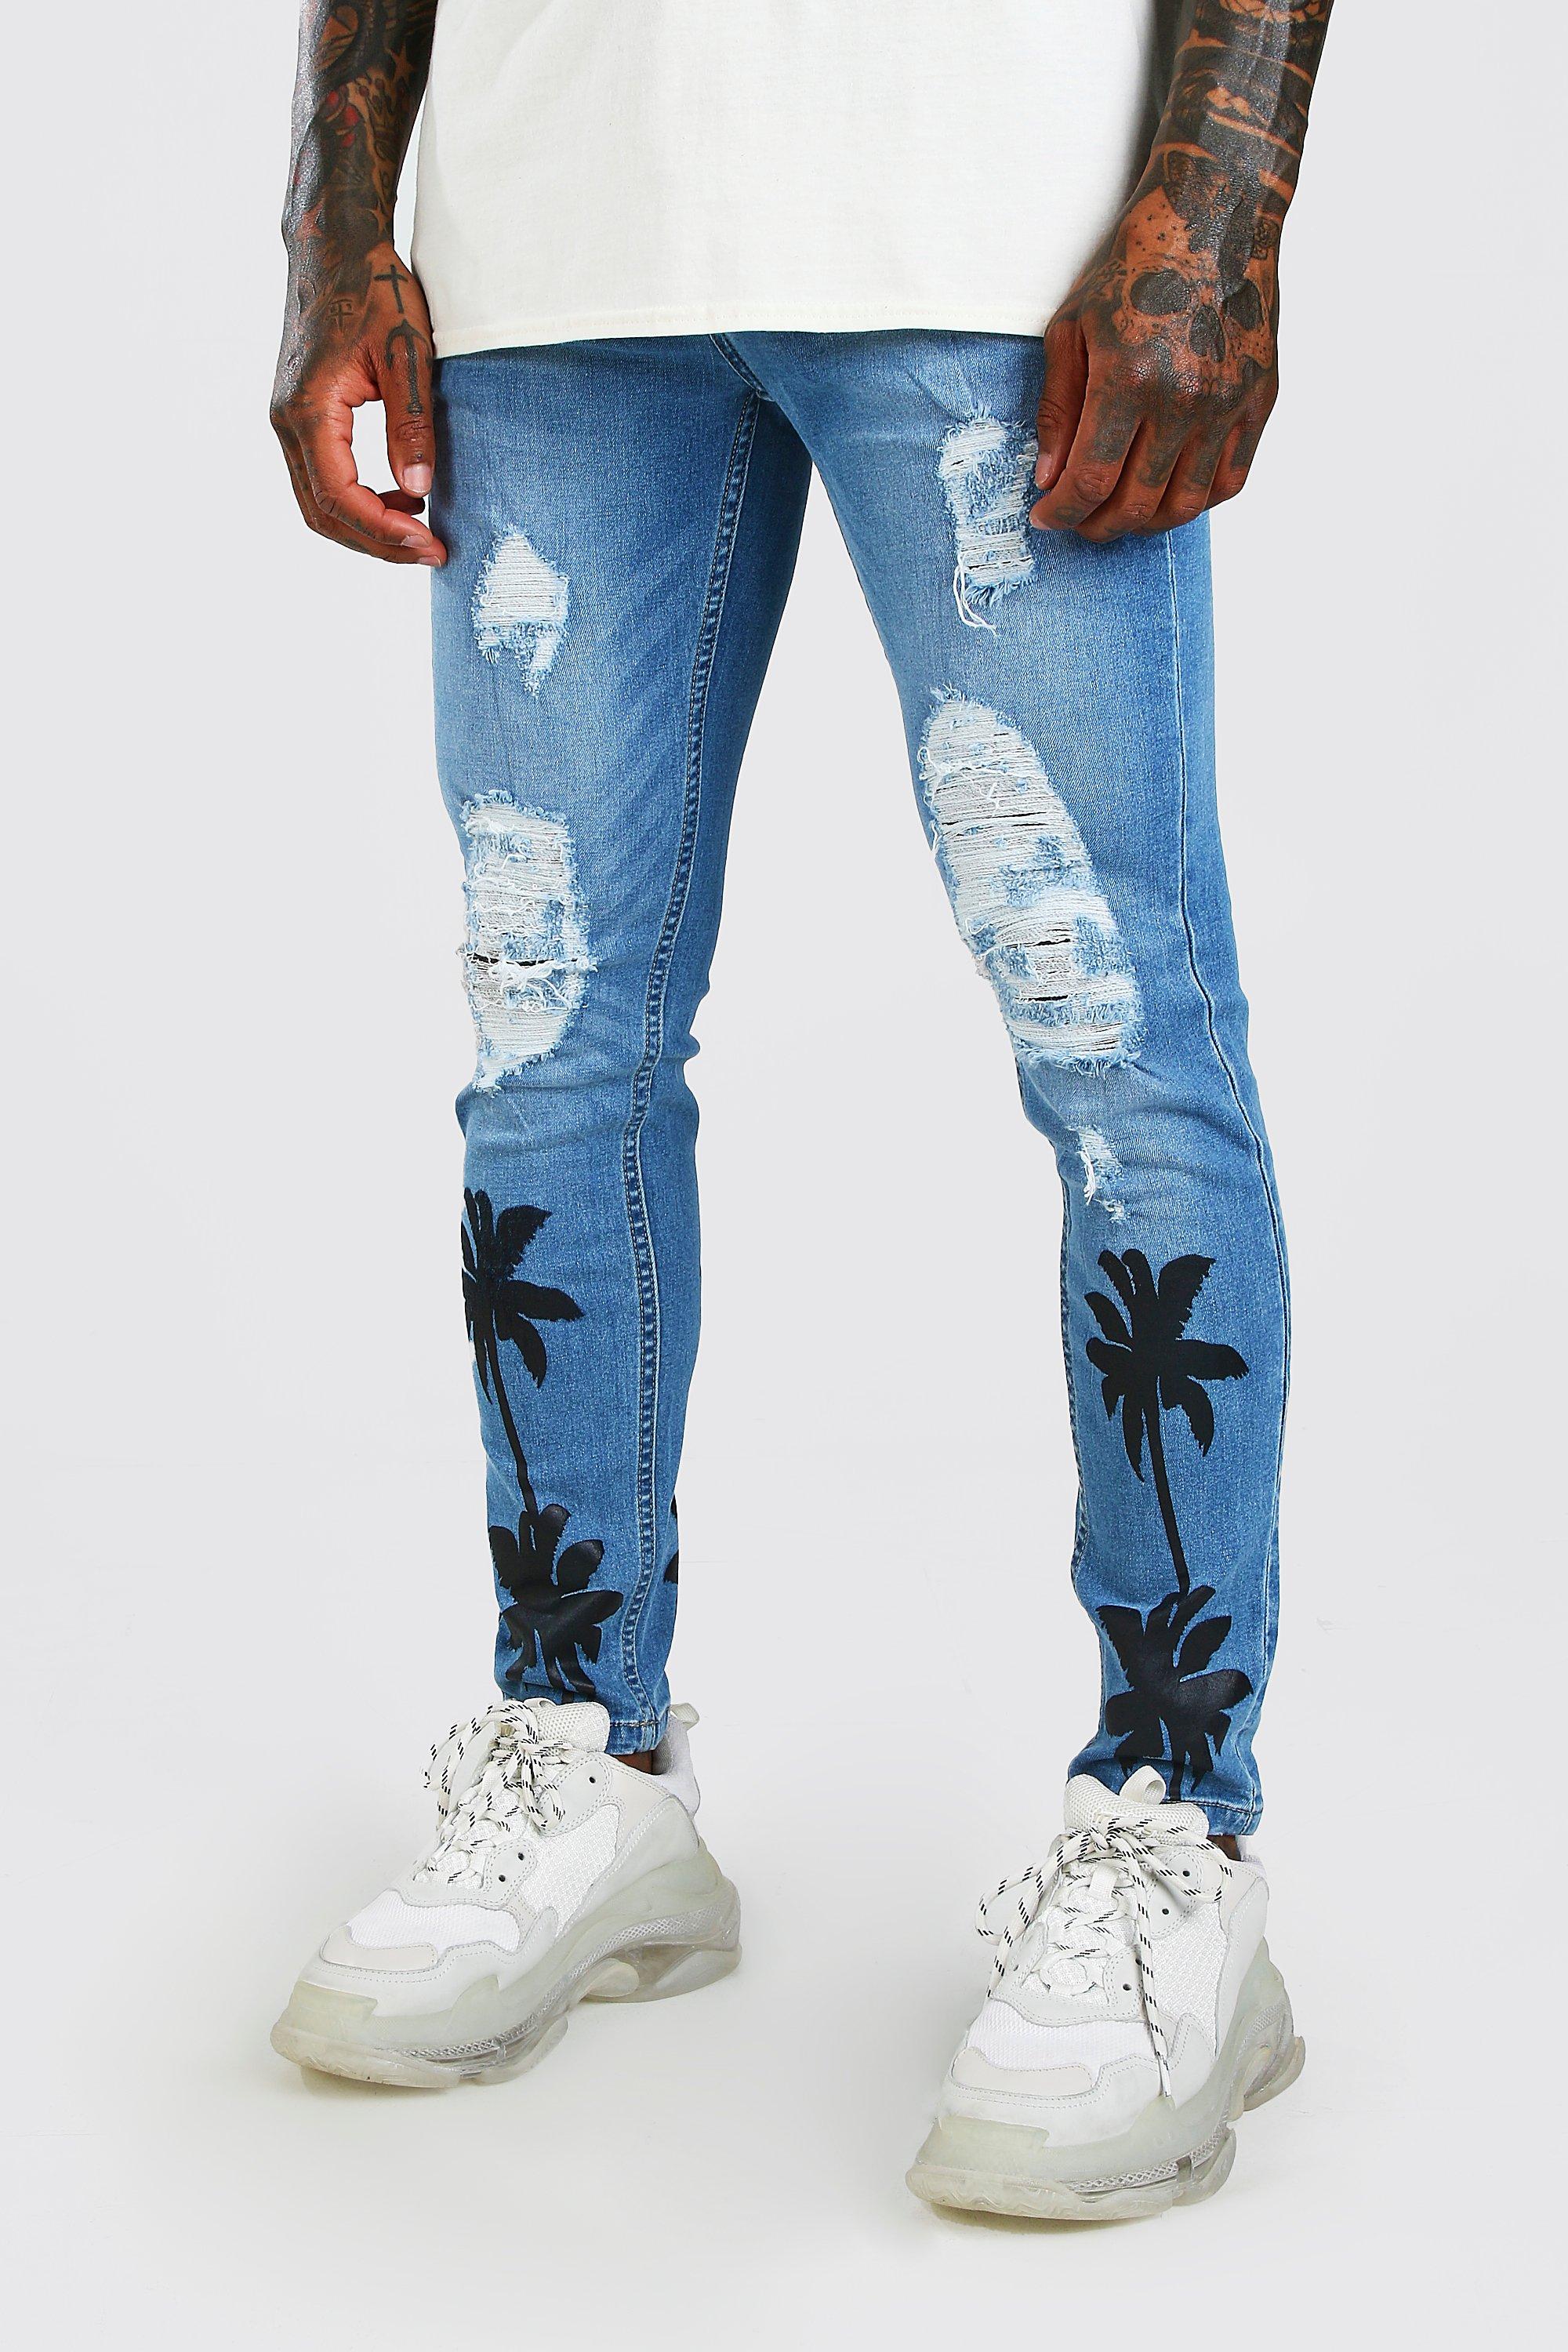 all over print jeans